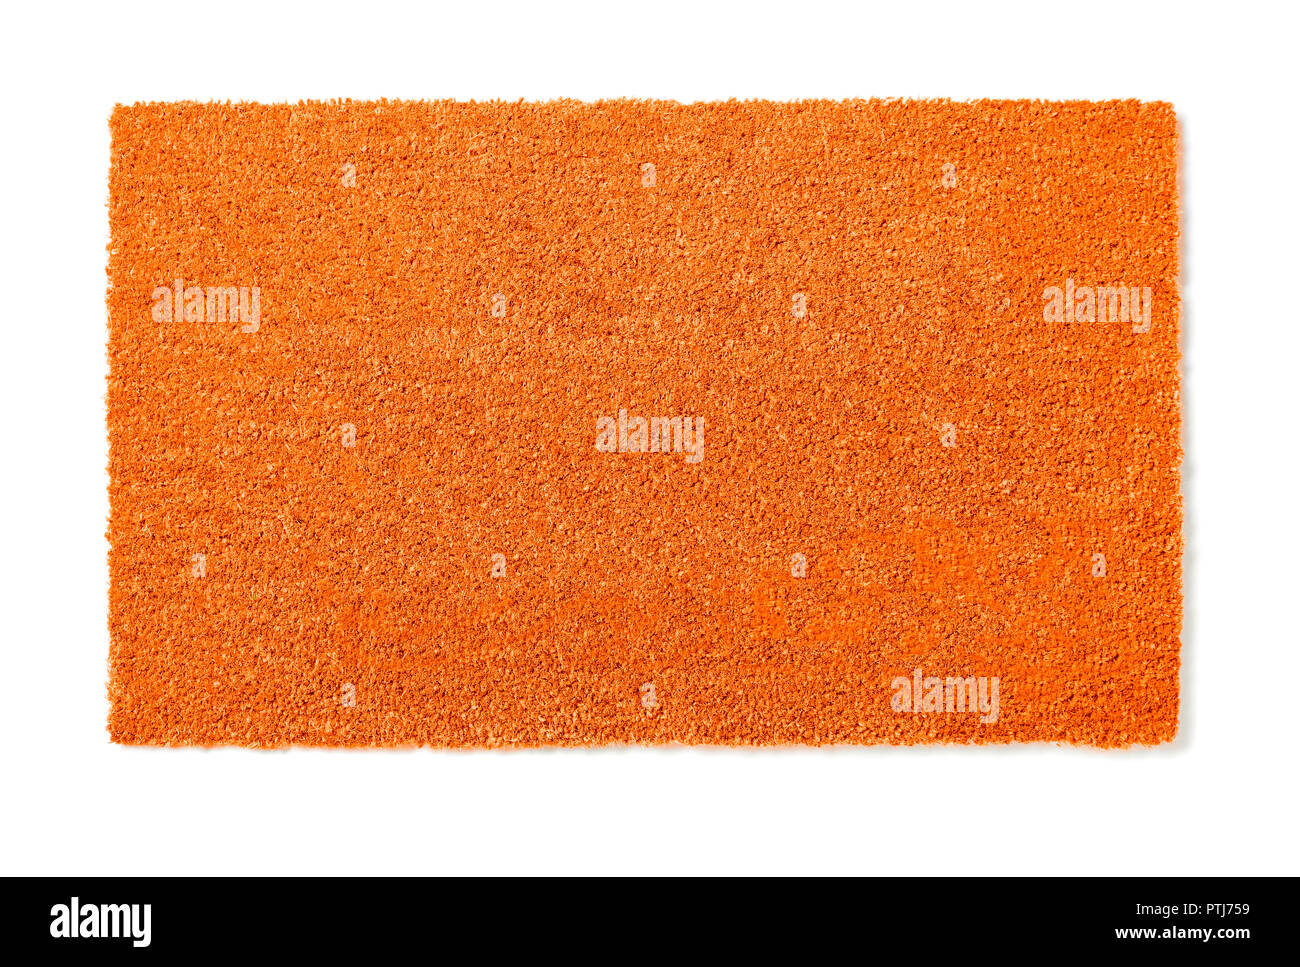 Blank Orange Welcome Mat Isolated on White Background Ready For Your Own Text. Stock Photo